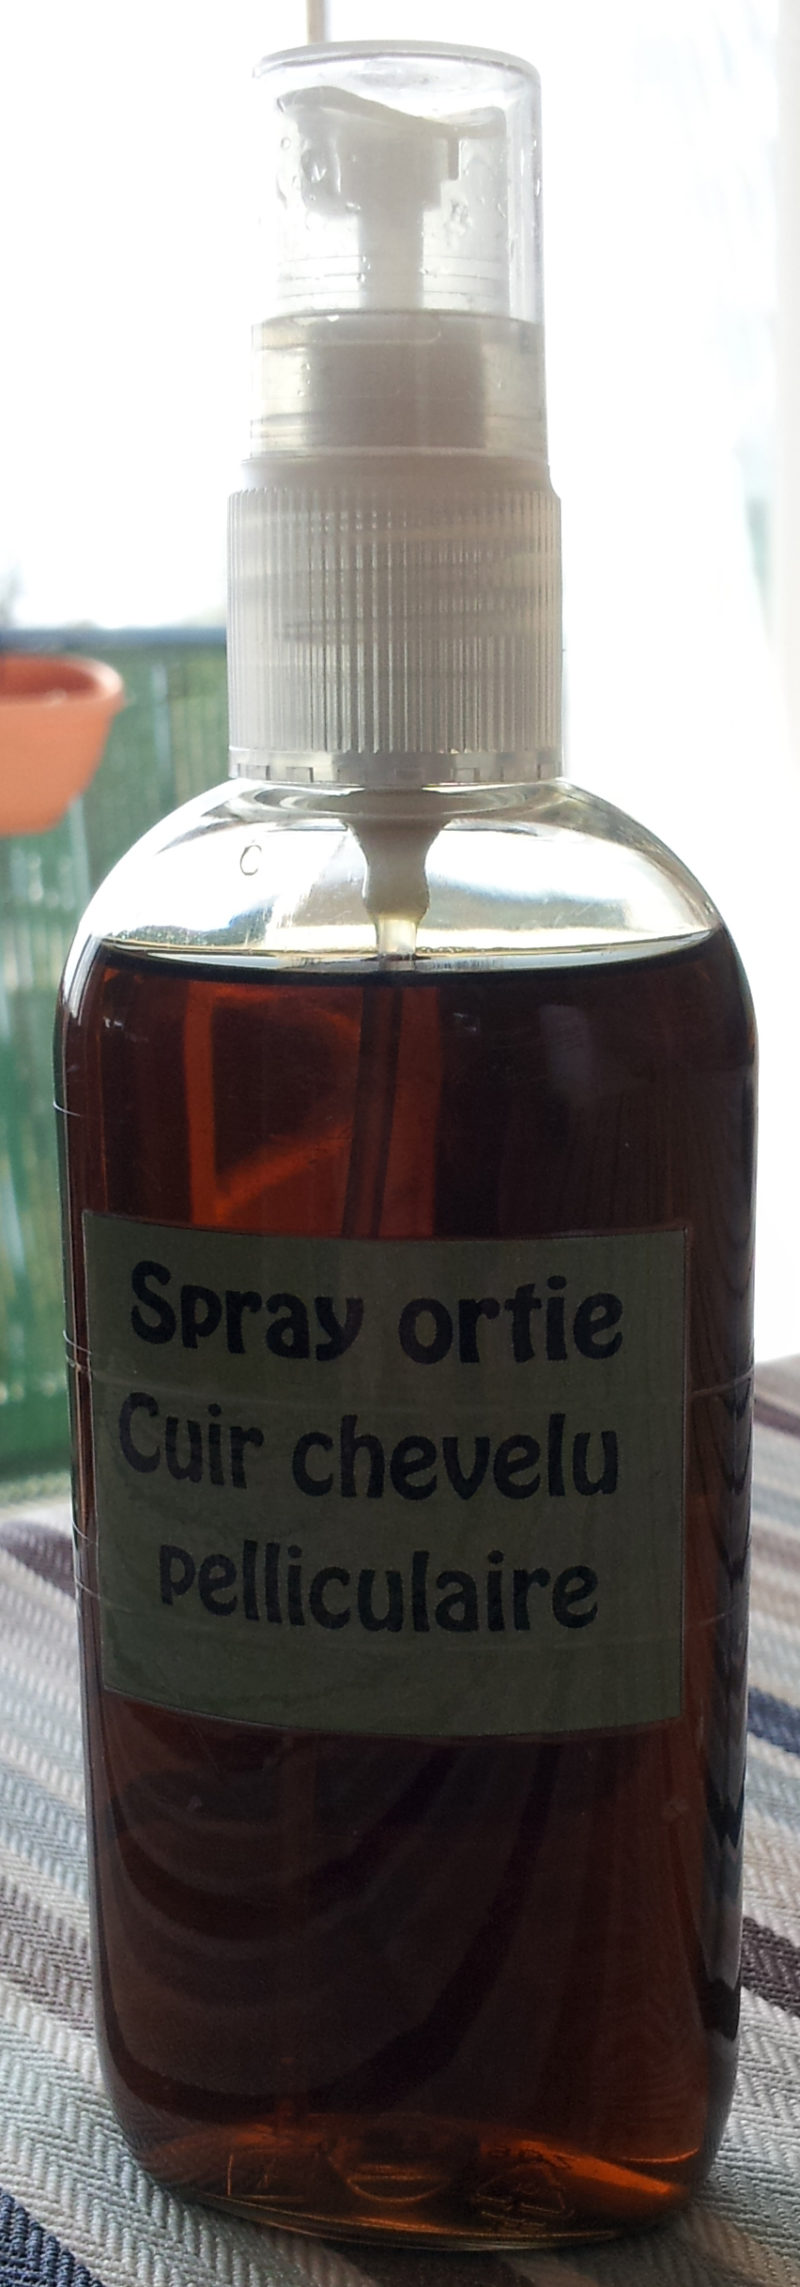 Macerat-poudre_ortie-soin-cheveux-fortifiant_naturel-homemade-lalo-cosmeto (1)